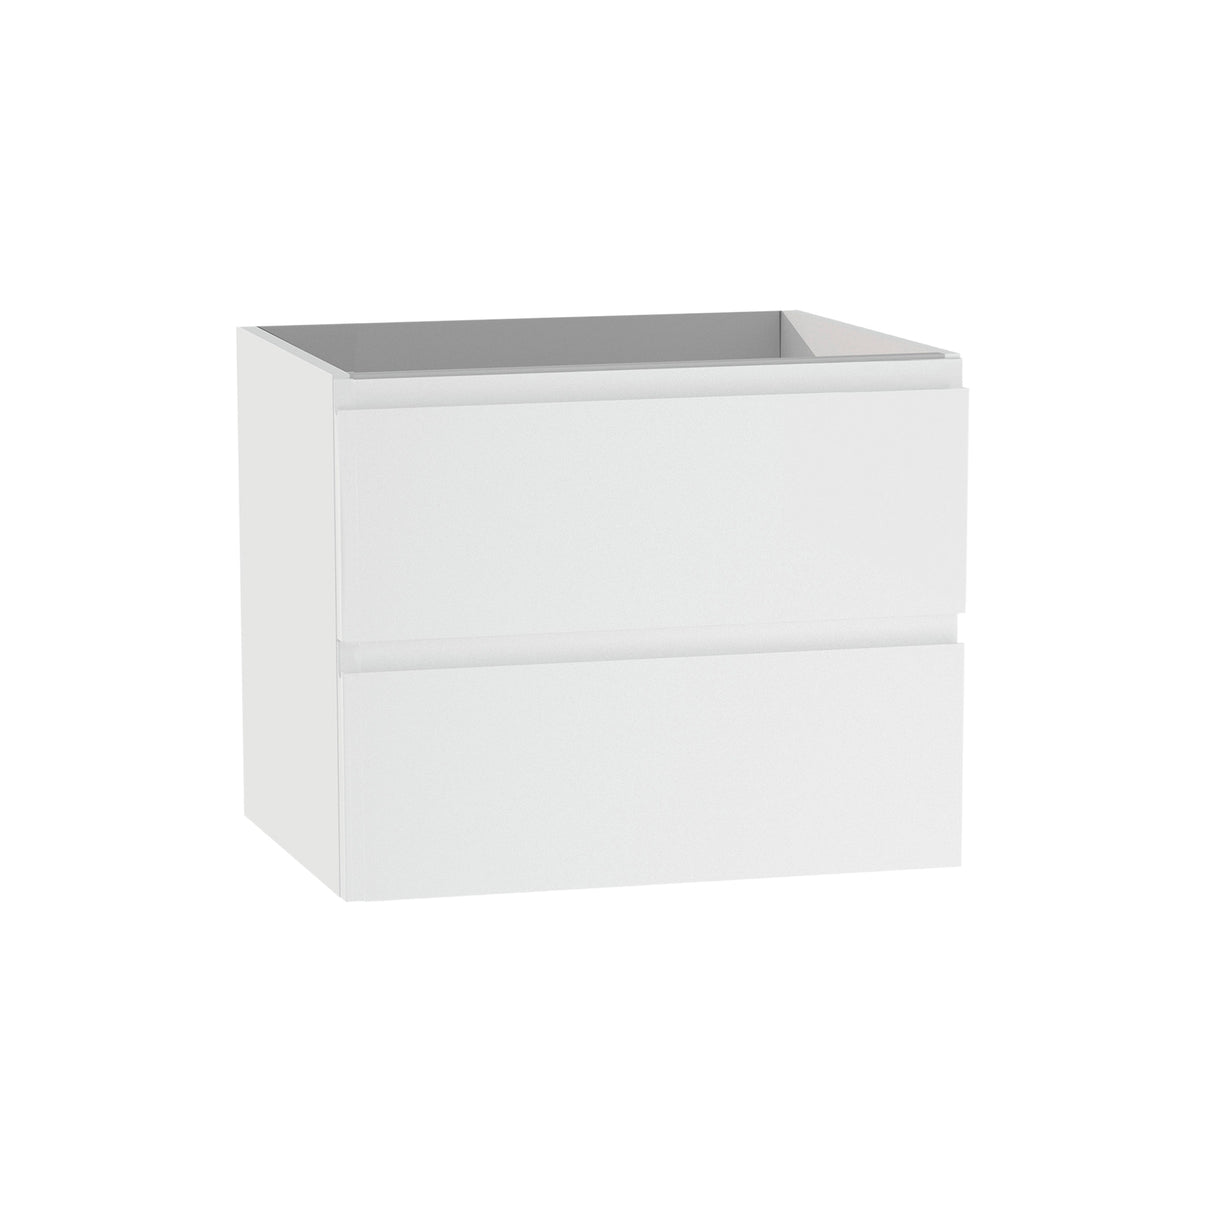 DAX Pasadena Engineered Wood and Porcelain Onix Basin with Single Vanity Cabinet, 24", Matte White DAX-PAS012427-ONX